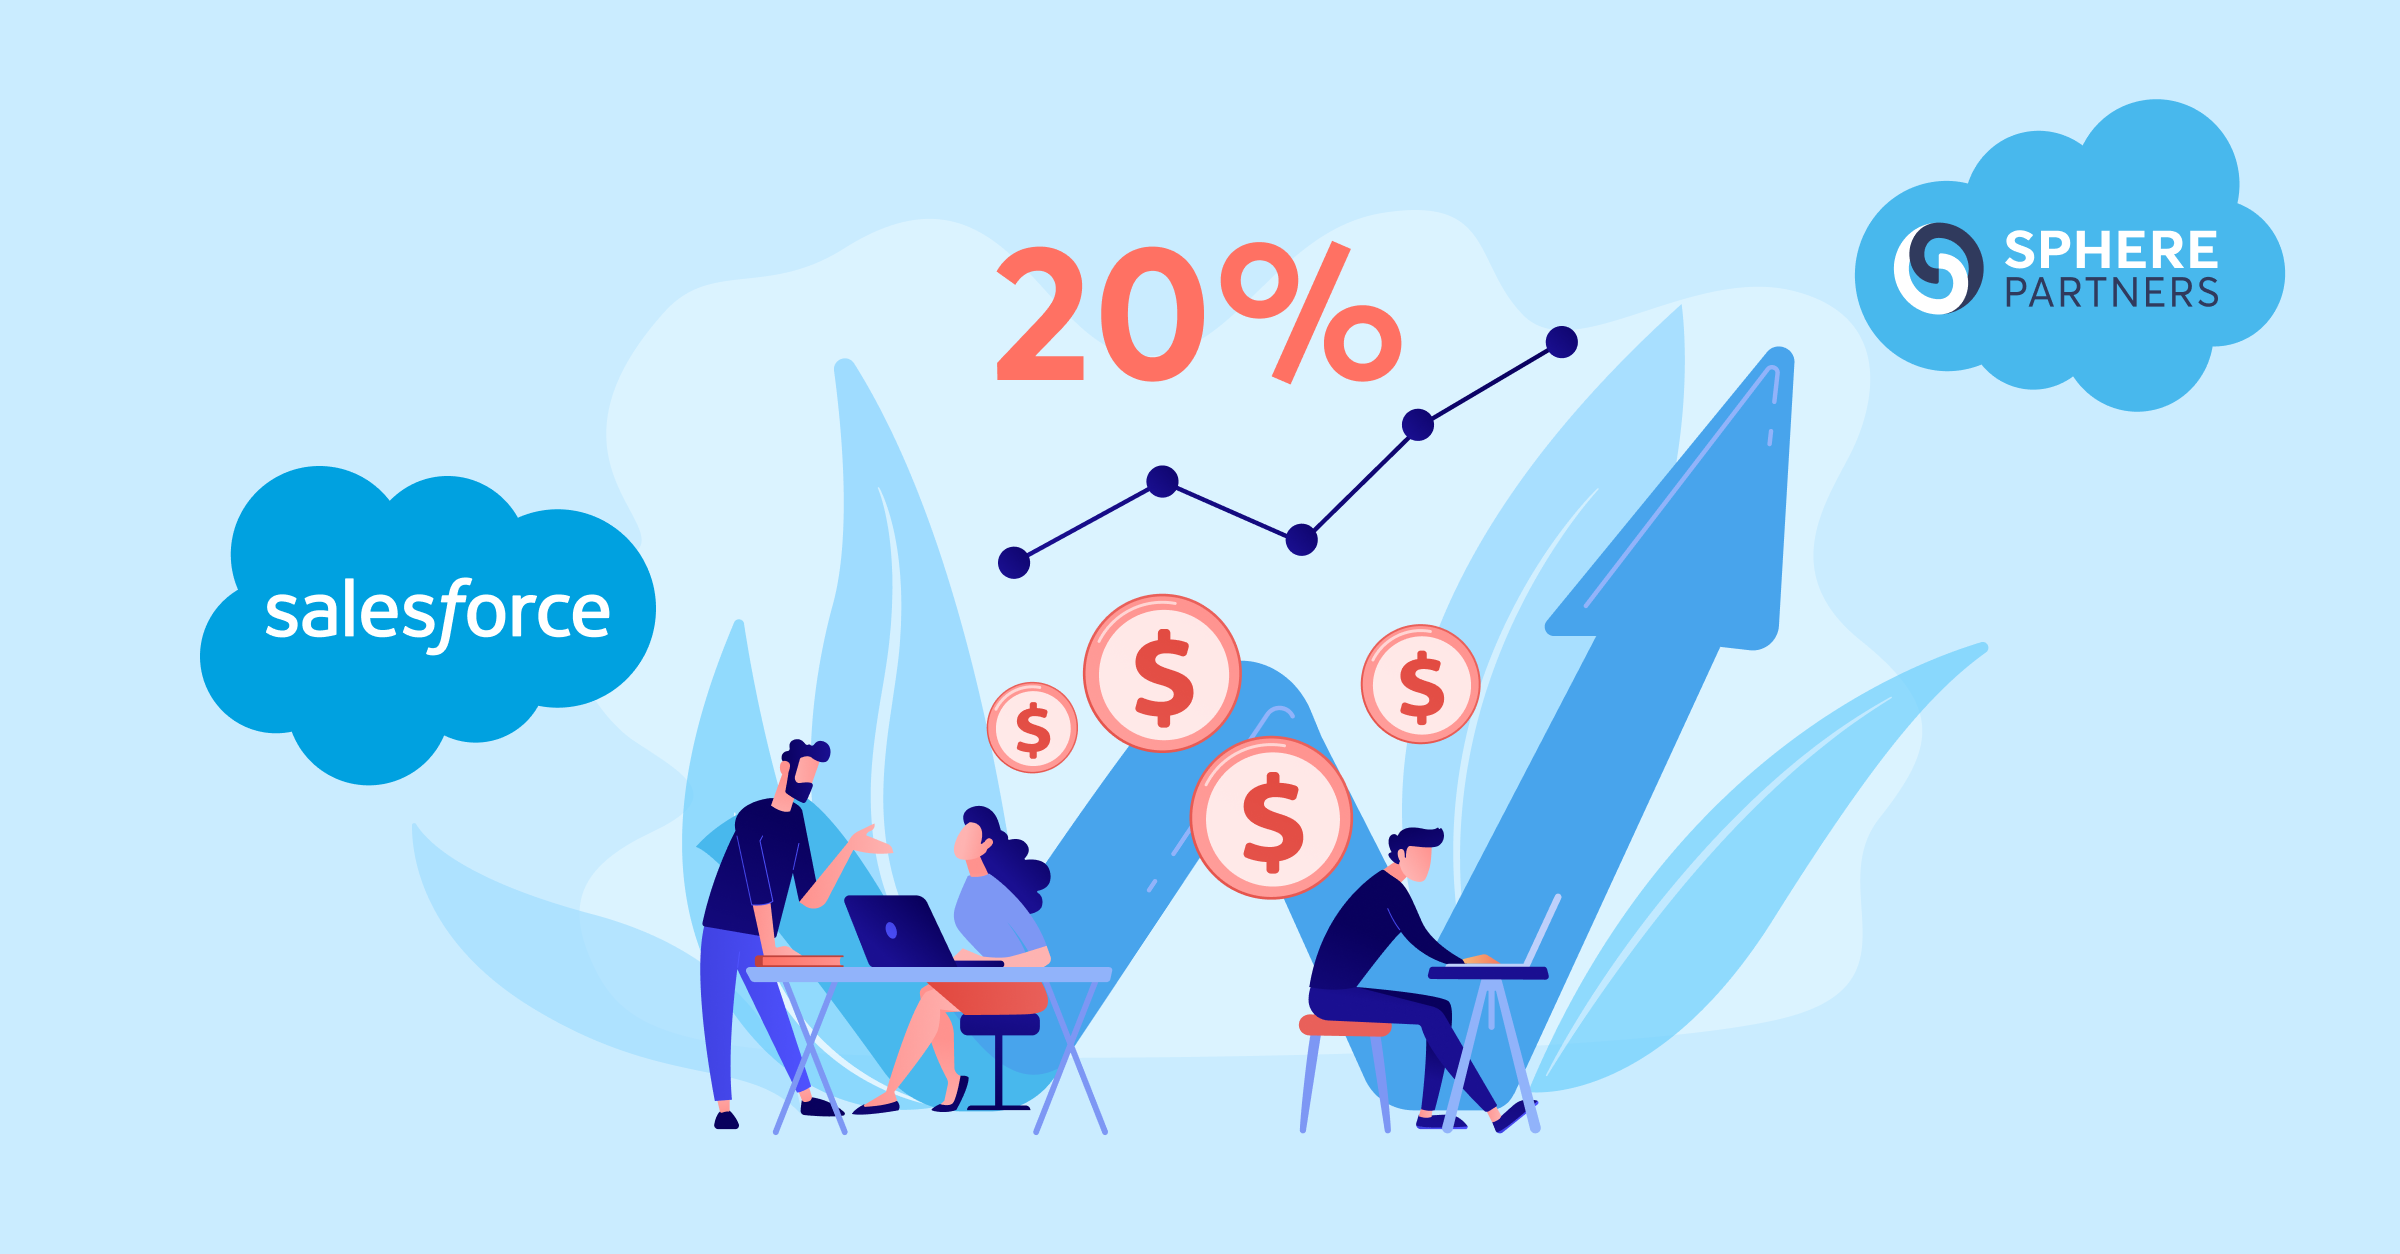 How we helped double leads and boosted sales by 20% for our client